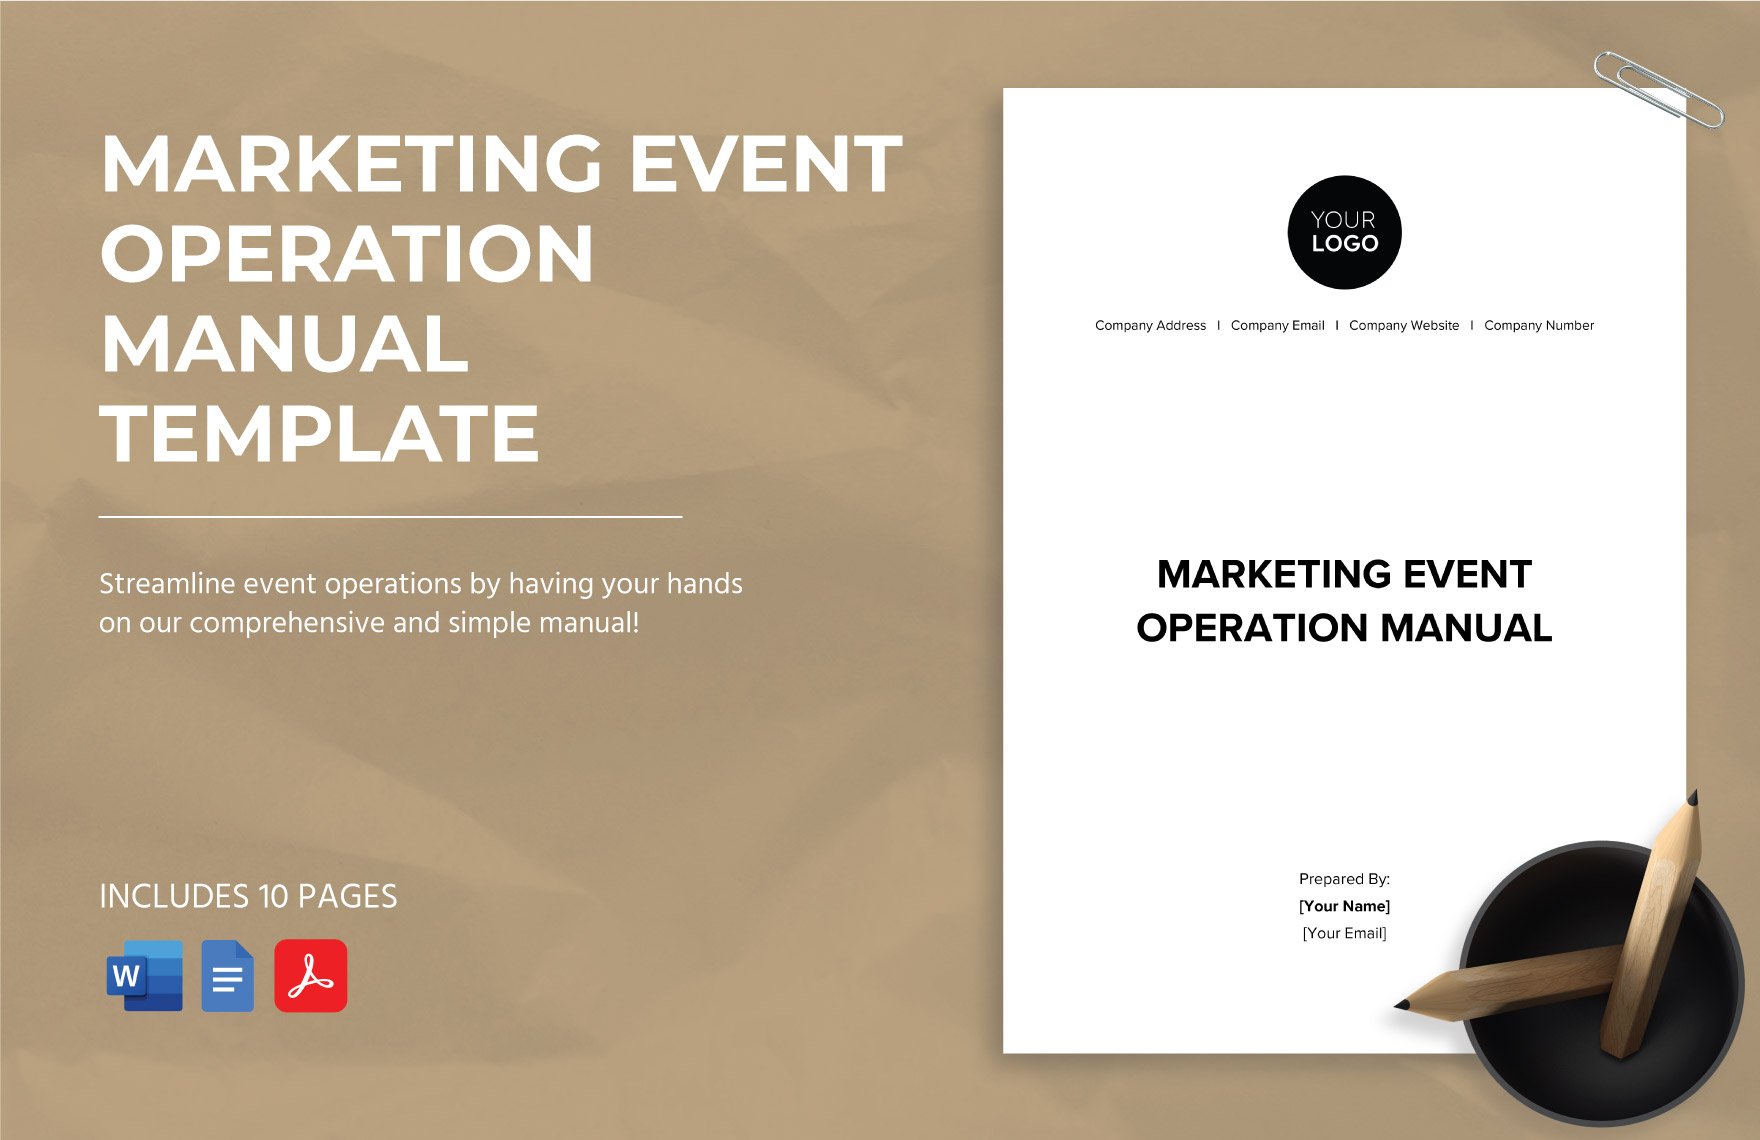 Marketing Event Operation Manual Template